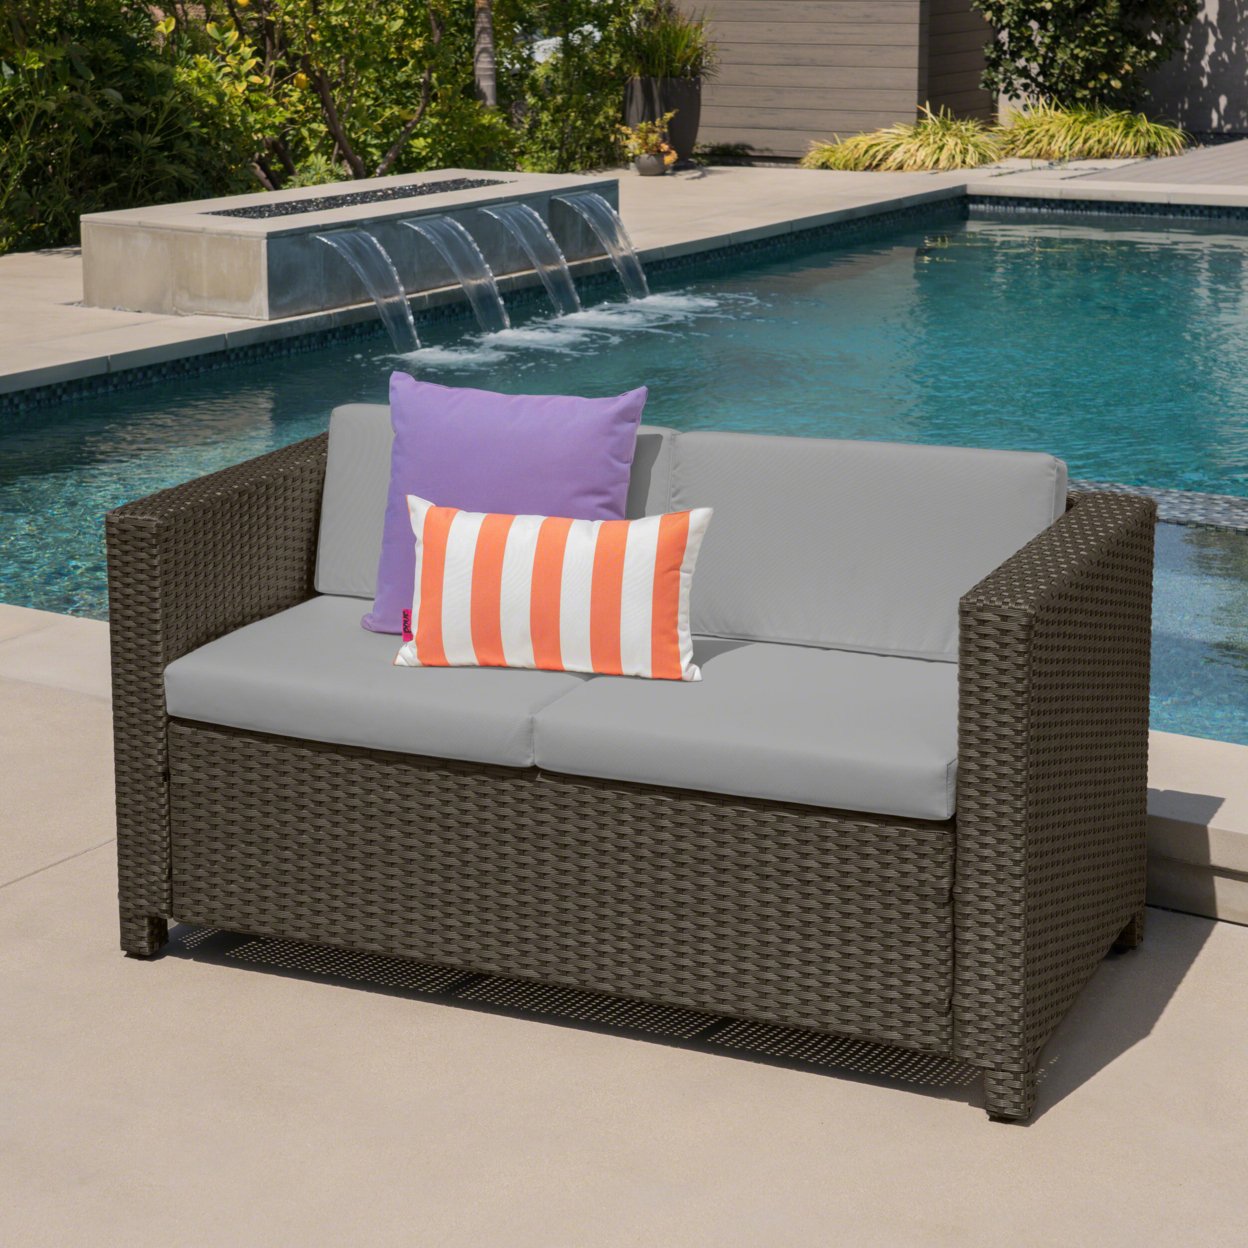 Lorelei Outdoor Wicker Loveseat With Water Resistant Cushions - Brown/Ceramic Gray